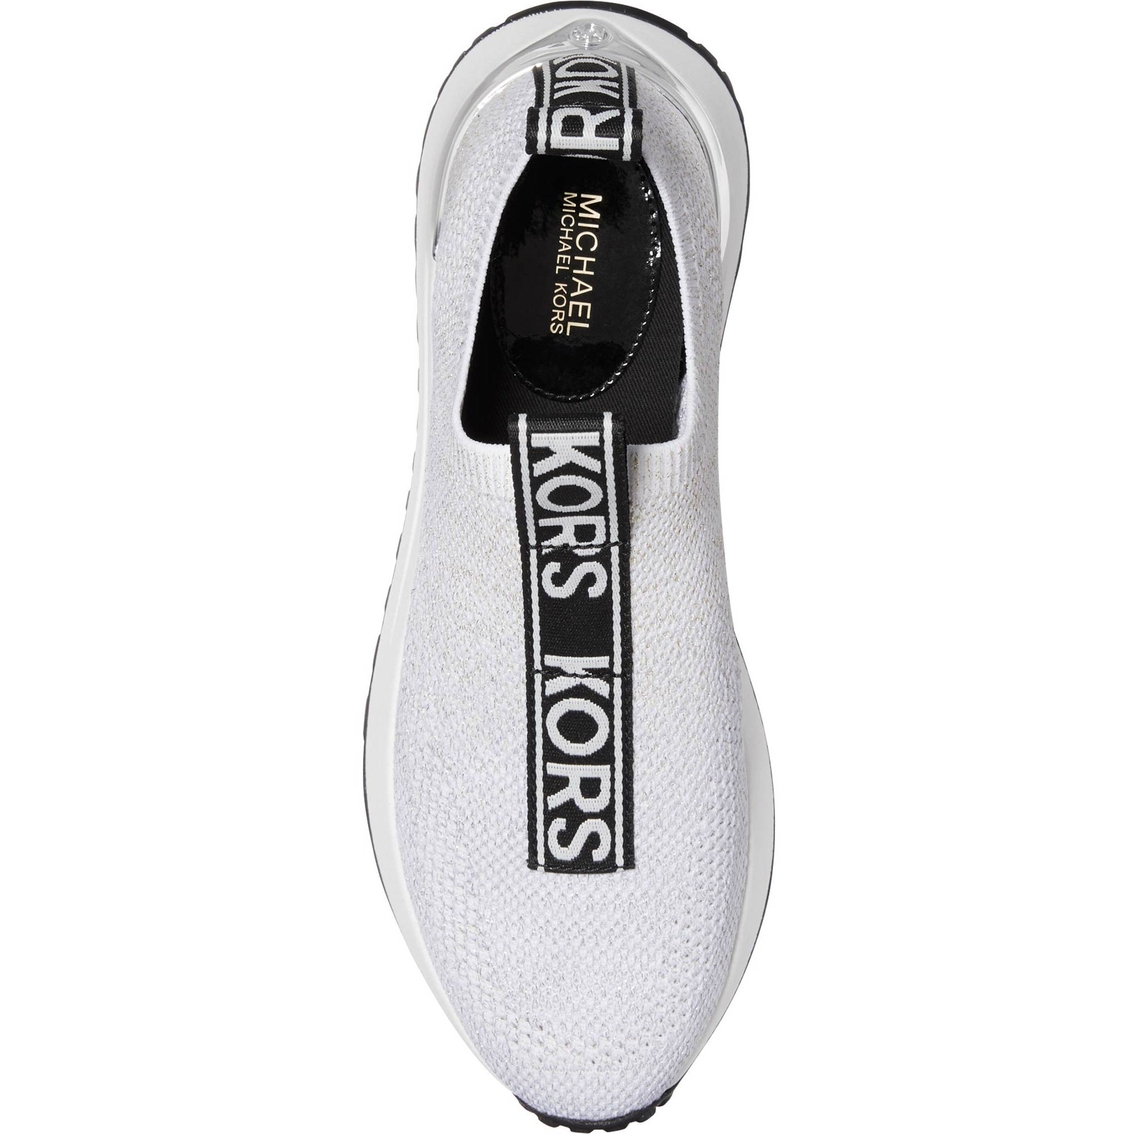 Michael Kors Bodie Slip On Shoes - Image 4 of 4